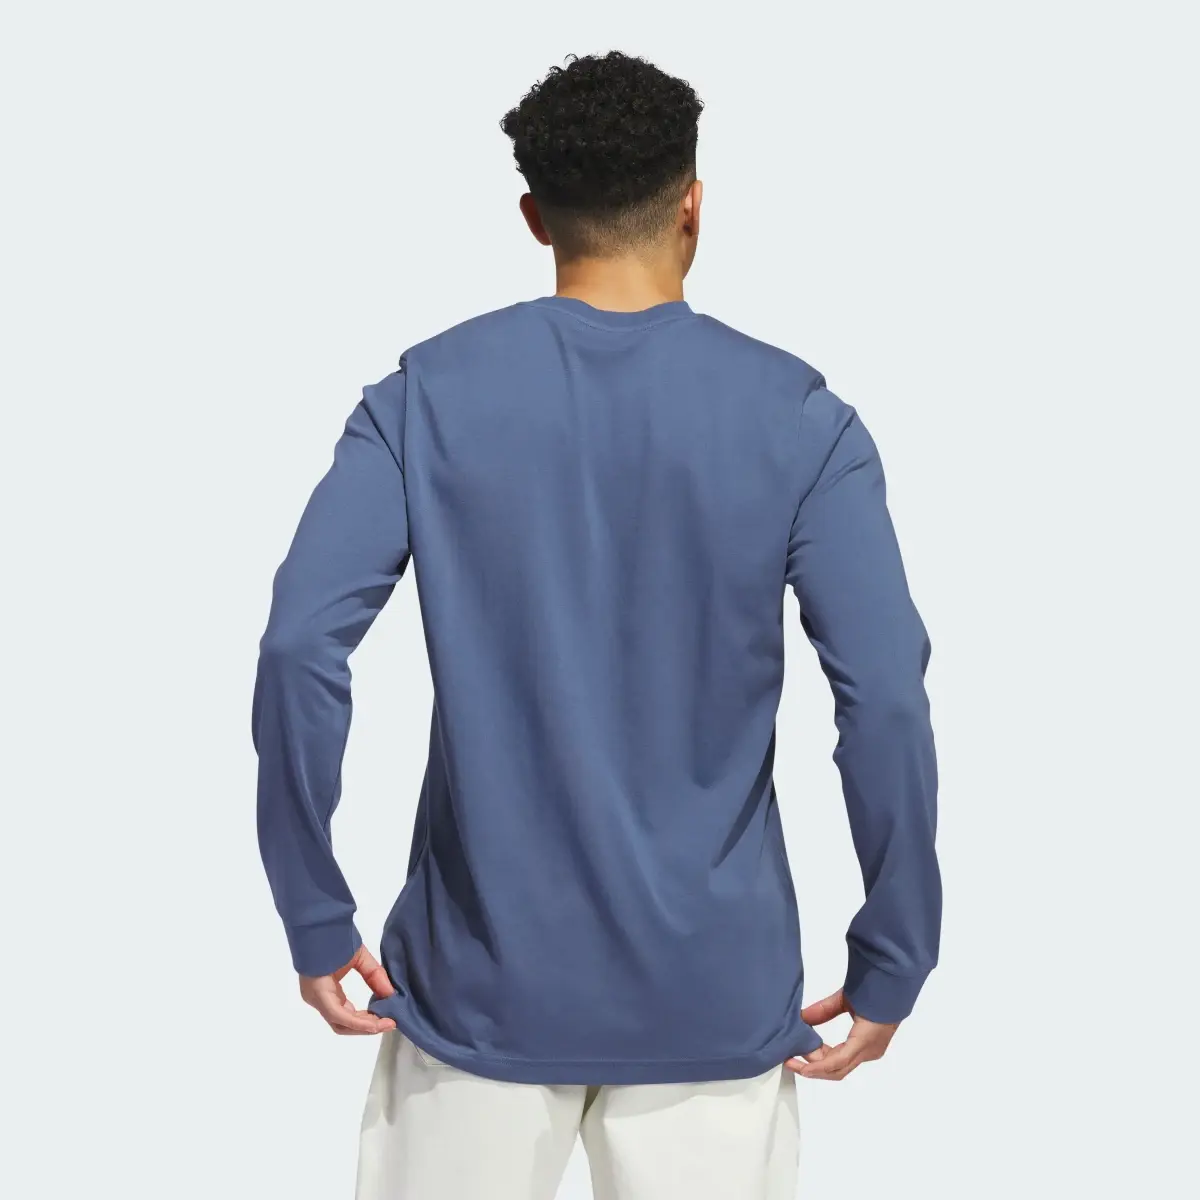 Adidas Go-To Crest Graphic Long Sleeve Tee. 3